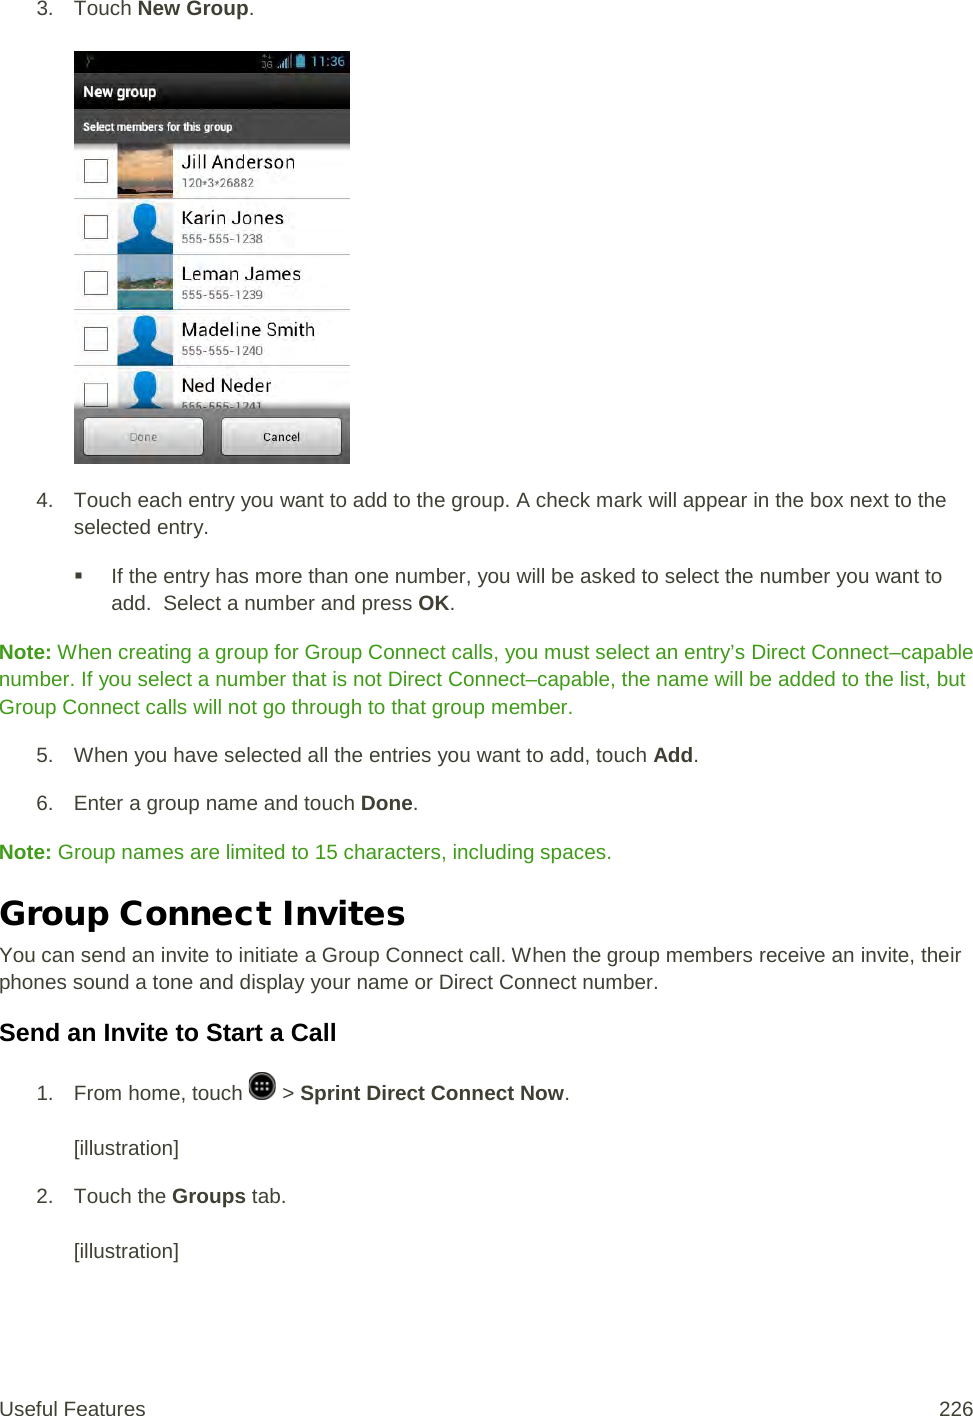 3. Touch New Group.   4. Touch each entry you want to add to the group. A check mark will appear in the box next to the selected entry.  If the entry has more than one number, you will be asked to select the number you want to add.  Select a number and press OK. Note: When creating a group for Group Connect calls, you must select an entry’s Direct Connect–capable number. If you select a number that is not Direct Connect–capable, the name will be added to the list, but Group Connect calls will not go through to that group member. 5. When you have selected all the entries you want to add, touch Add. 6. Enter a group name and touch Done. Note: Group names are limited to 15 characters, including spaces. Group Connect Invites You can send an invite to initiate a Group Connect call. When the group members receive an invite, their phones sound a tone and display your name or Direct Connect number. Send an Invite to Start a Call 1.  From home, touch   &gt; Sprint Direct Connect Now.   [illustration] 2. Touch the Groups tab.   [illustration] Useful Features 226   